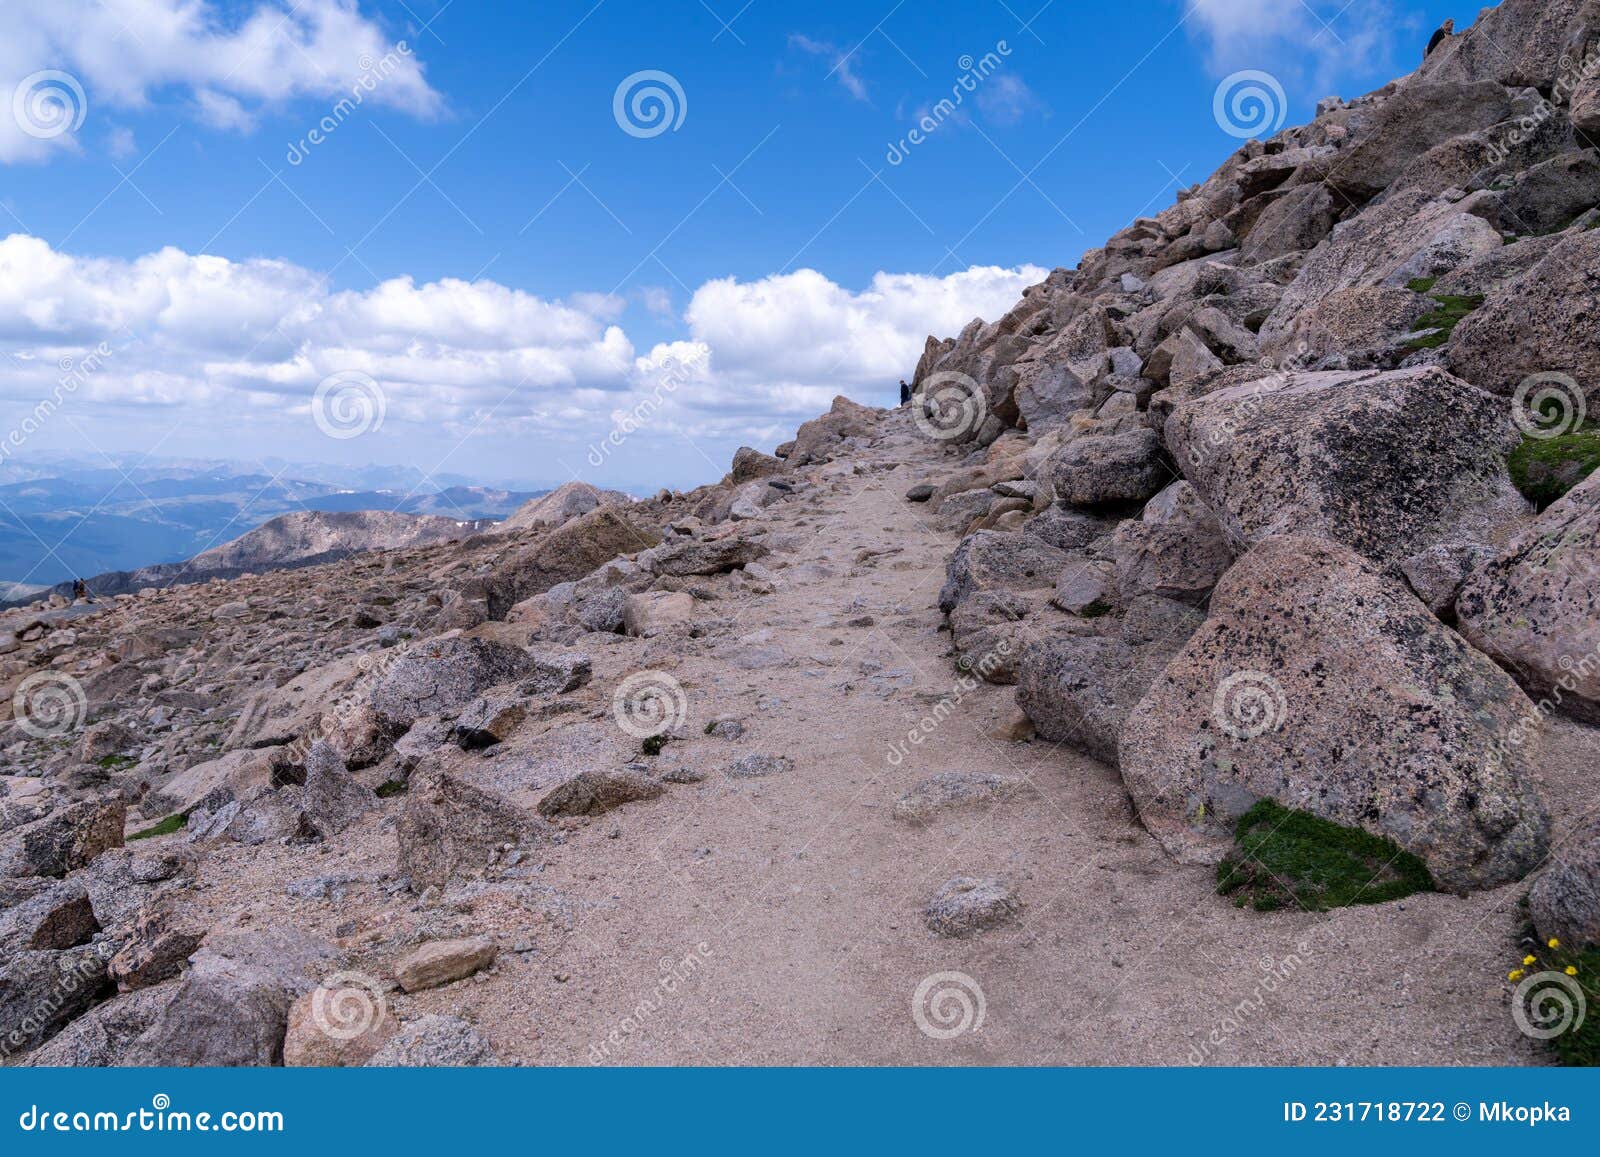 hiking trail leading to the top of mt. evans, a 14er mountain in colorado